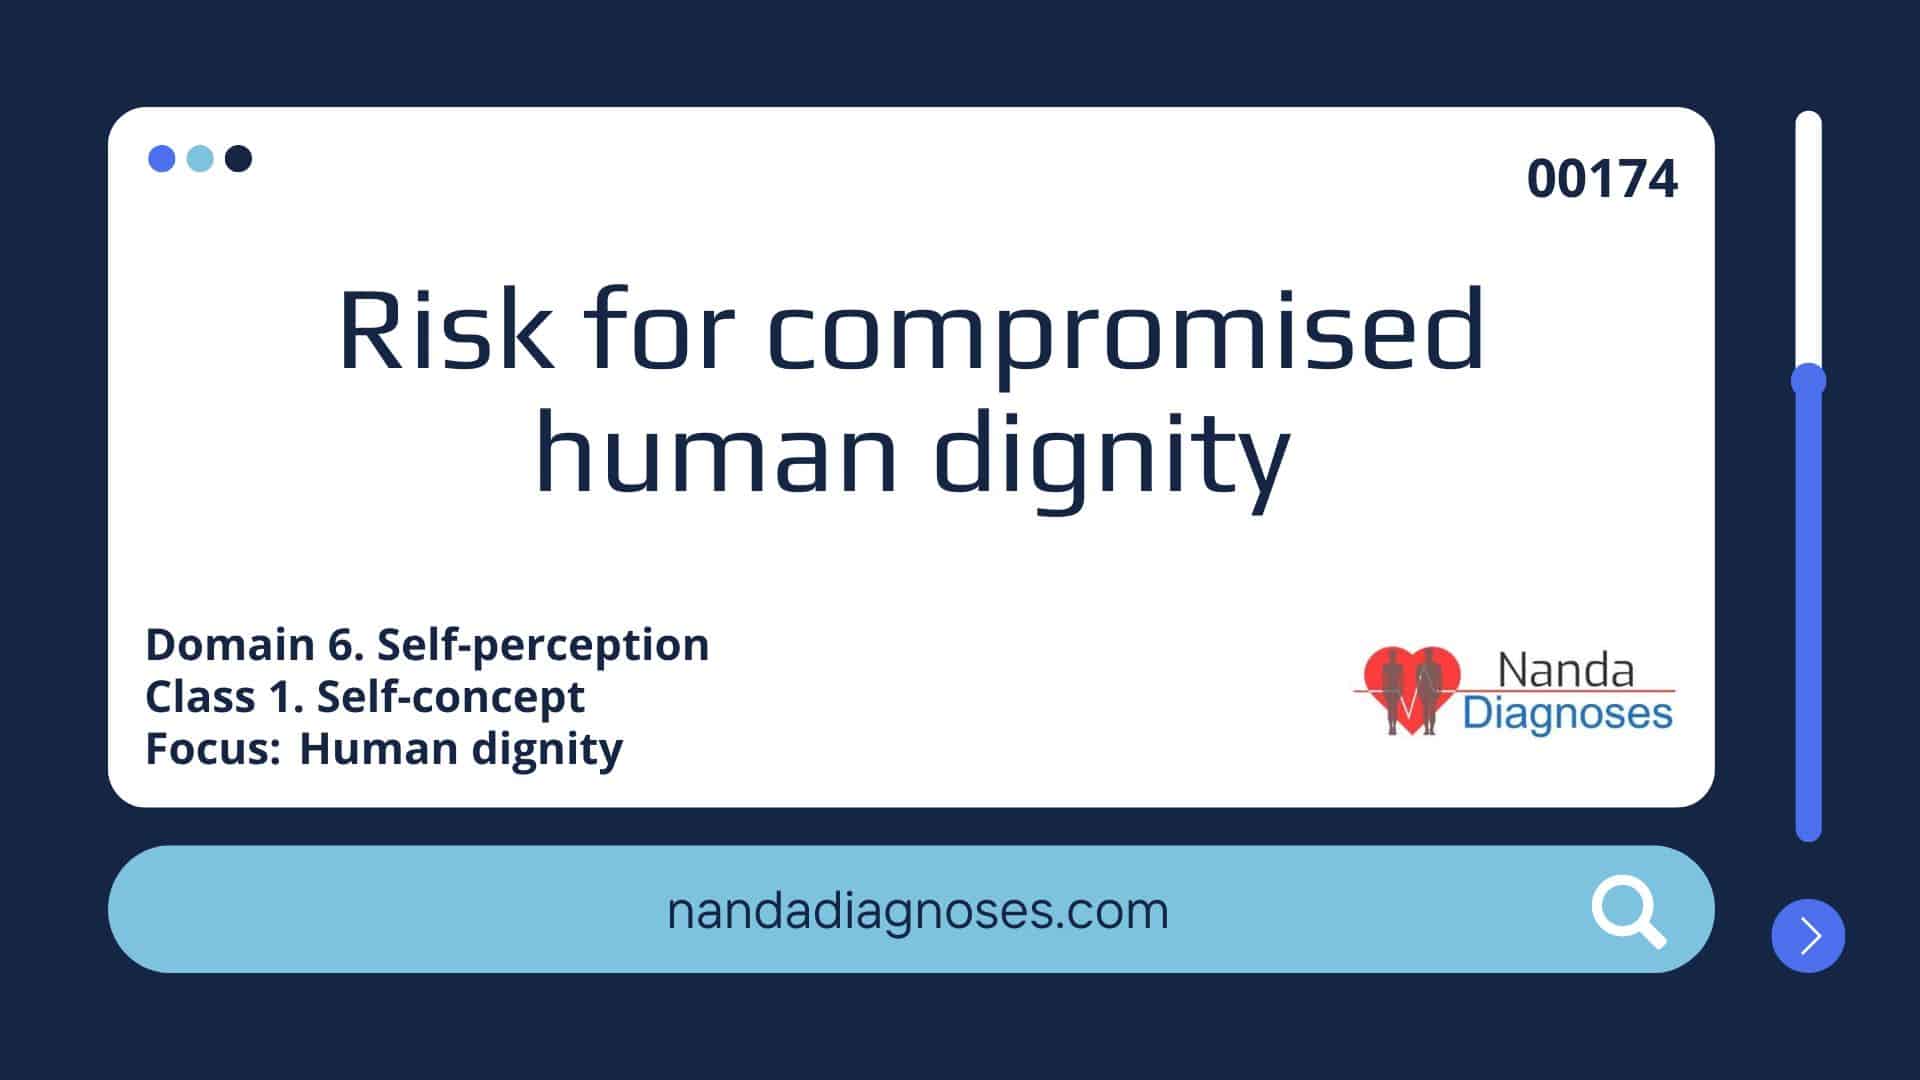 Nursing diagnosis Risk for compromised human dignity